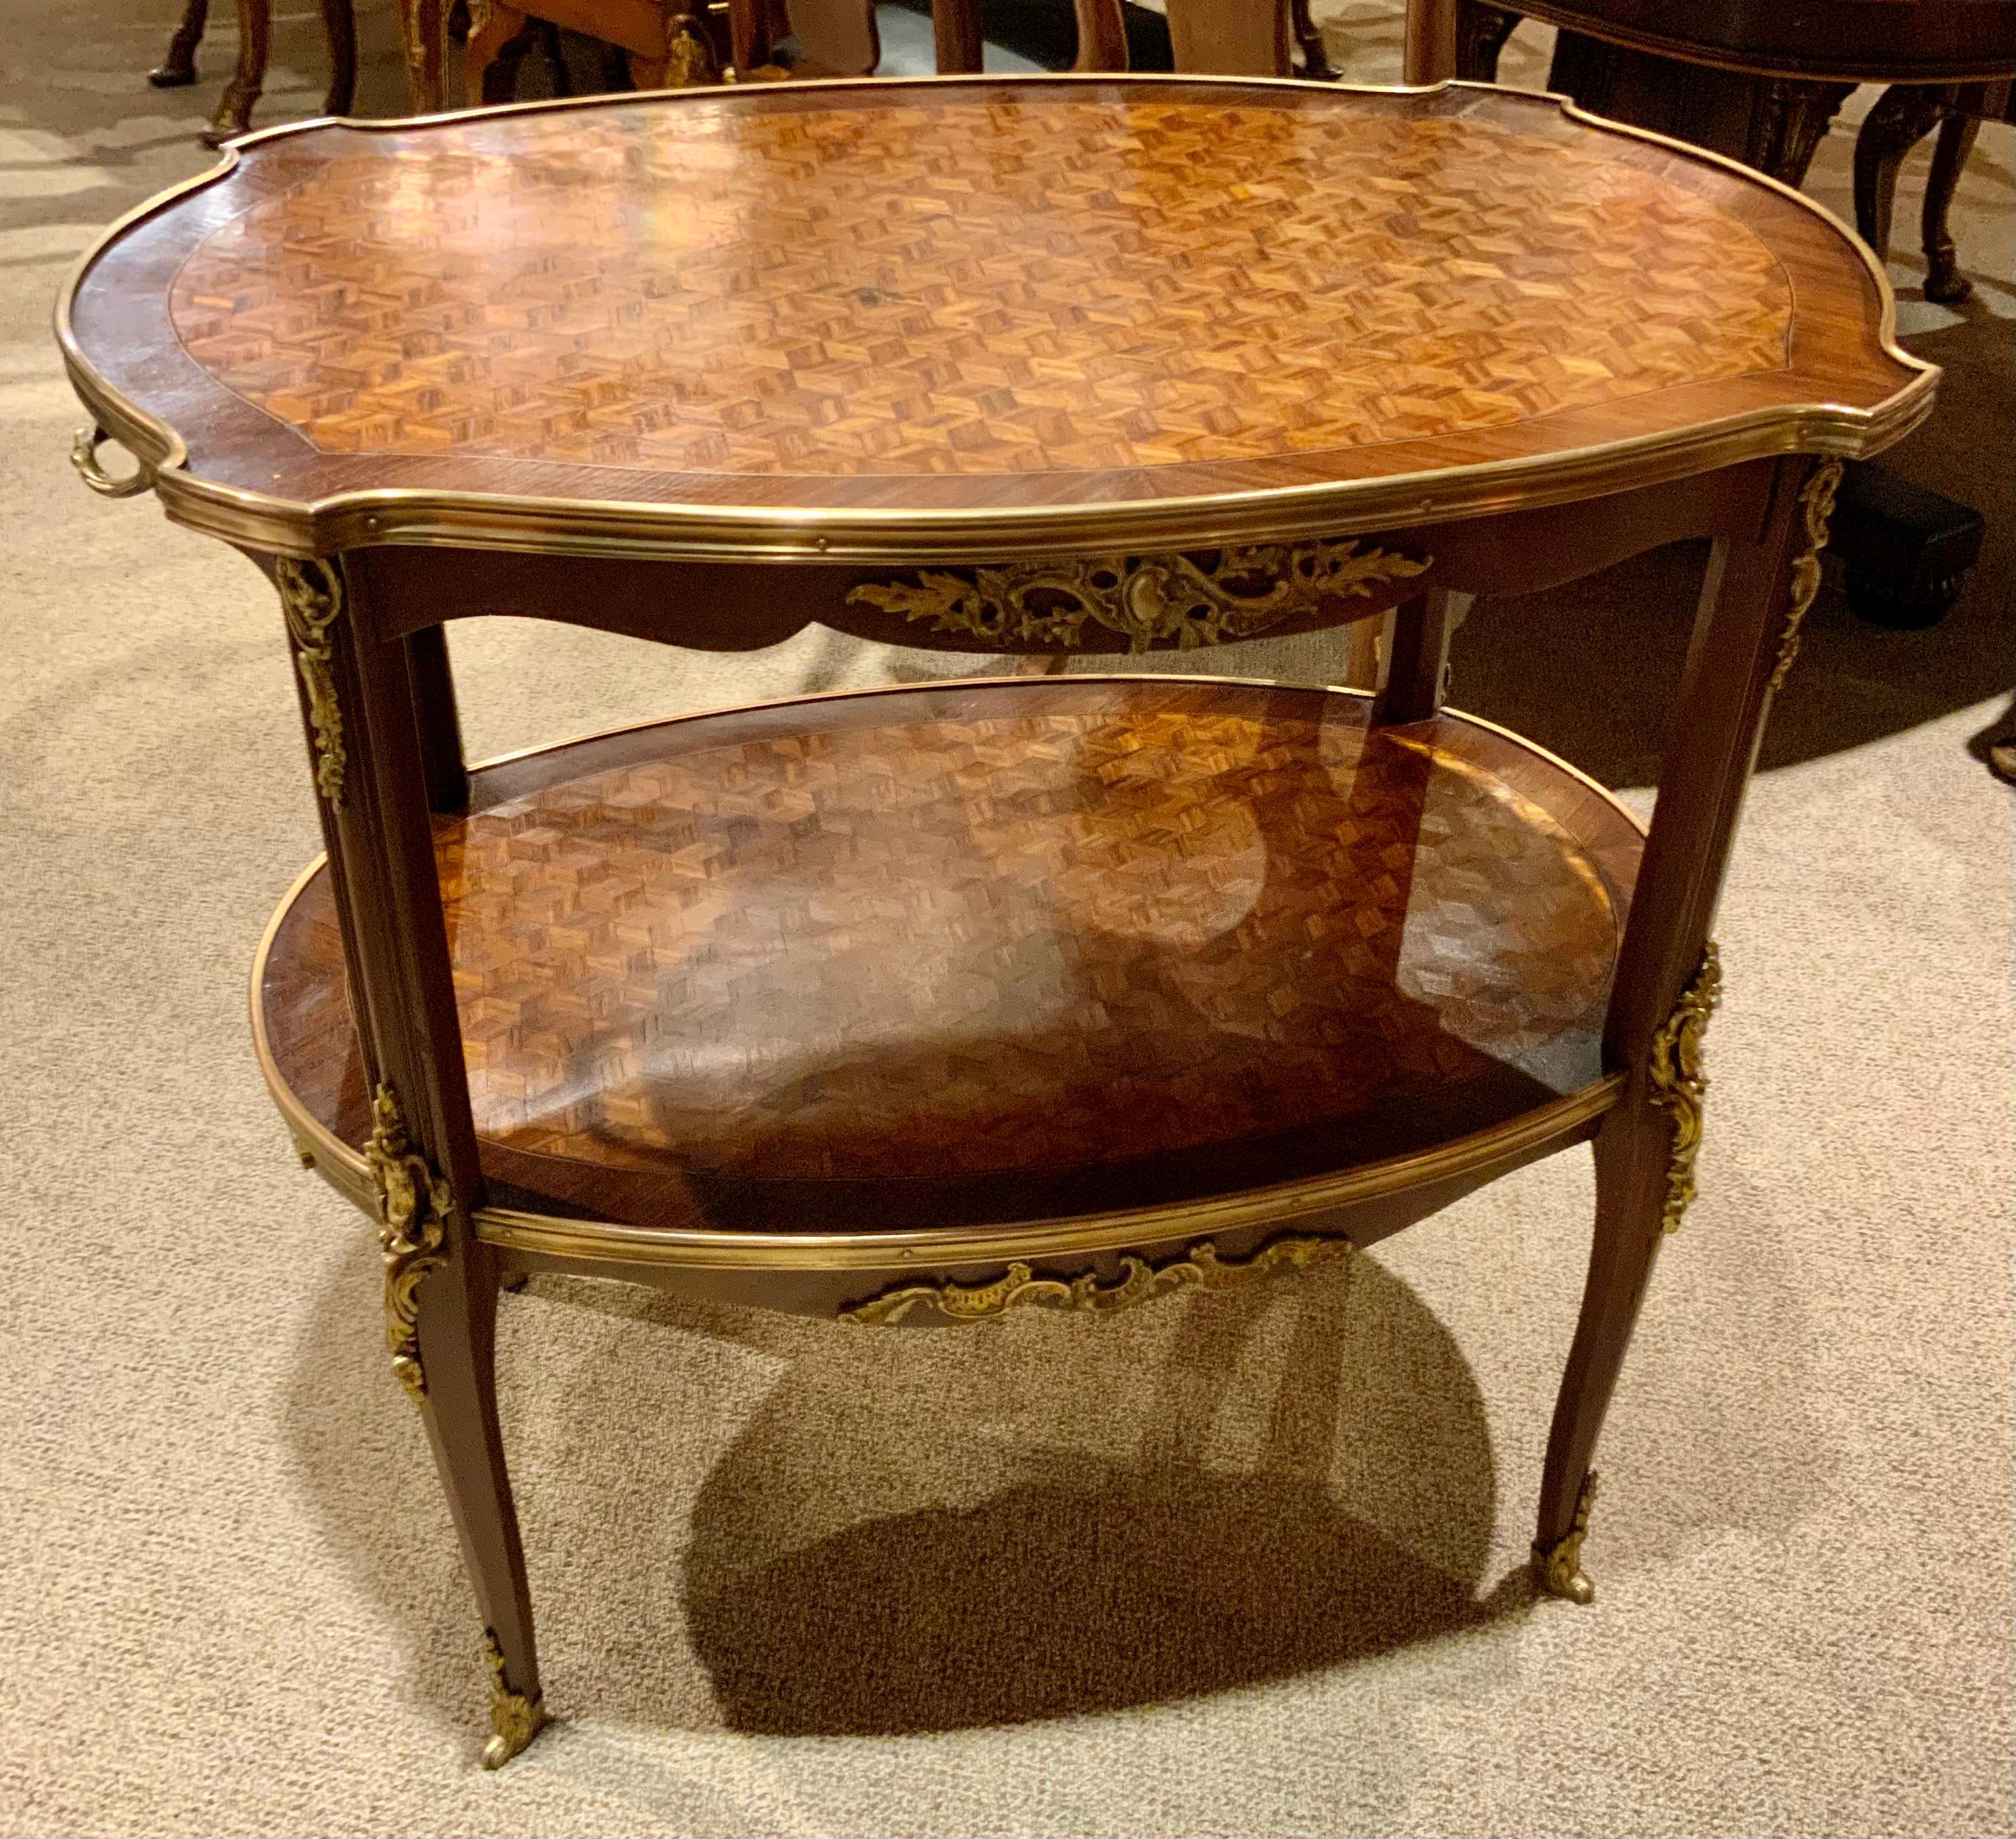 The parquetry inlay is fine quality workmanship and the
Bronze mounts have beautiful castings and the gilding
Is exceptional. This table has two tiers and works well
As a tea table or side table for serving. It is stable and
Very sturdy without